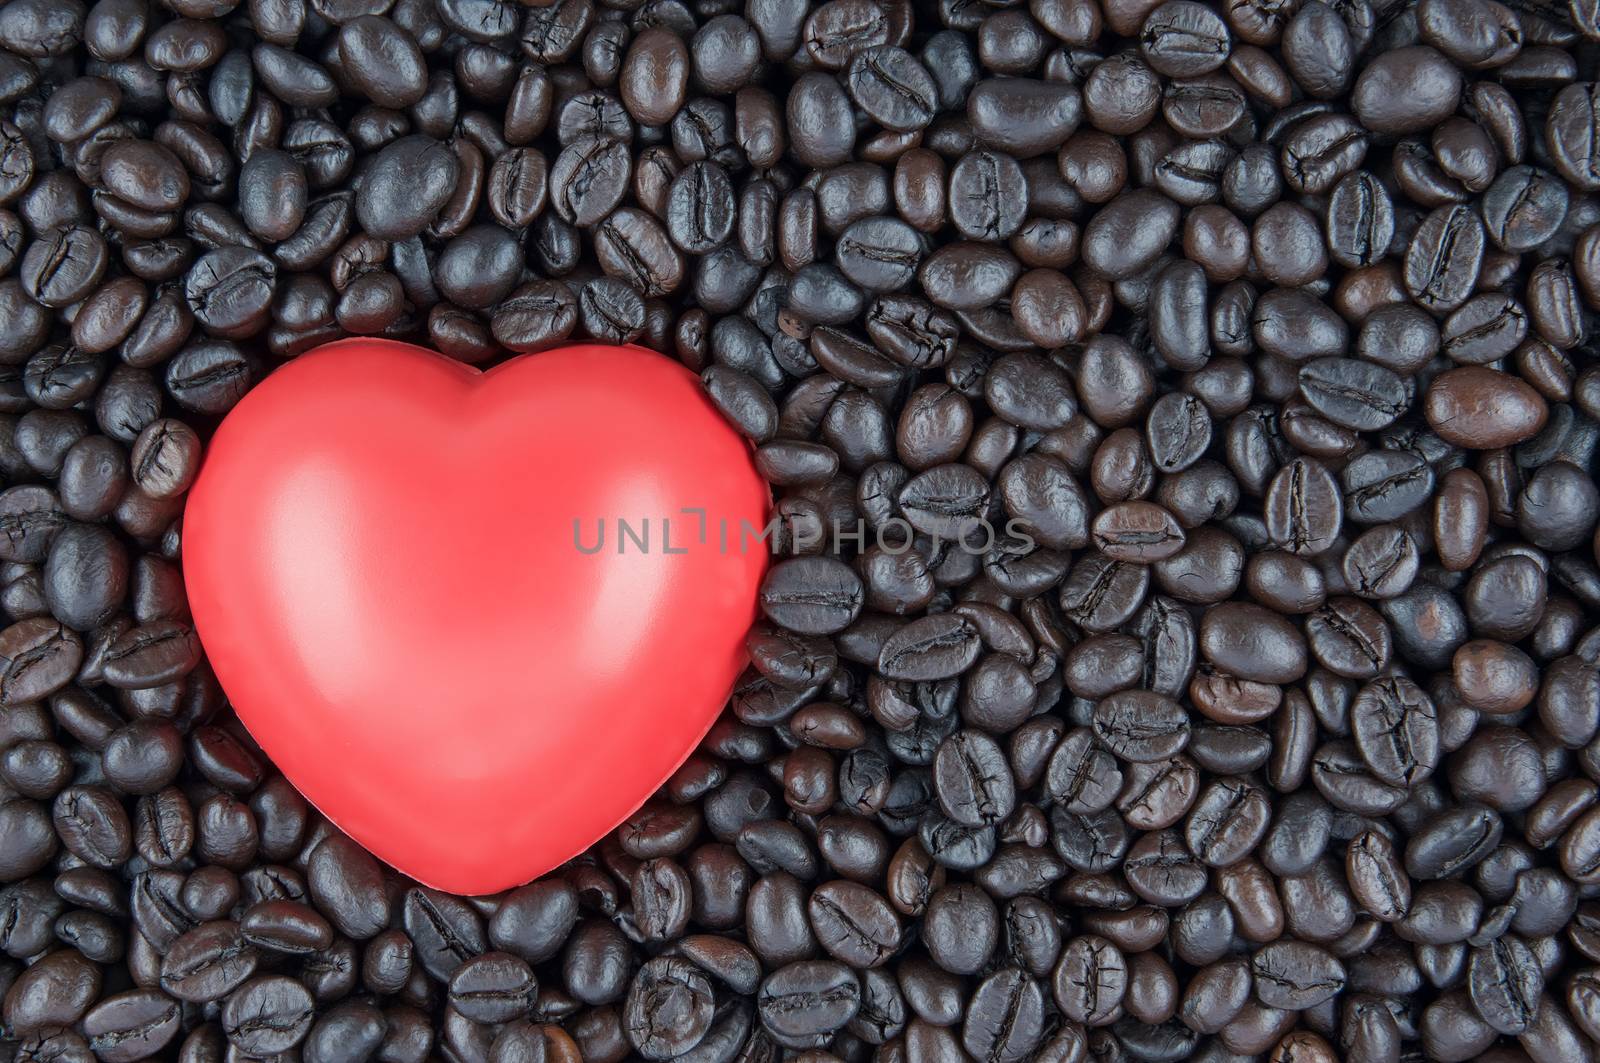 Red heart shape place on black roasted coffee beans by eaglesky